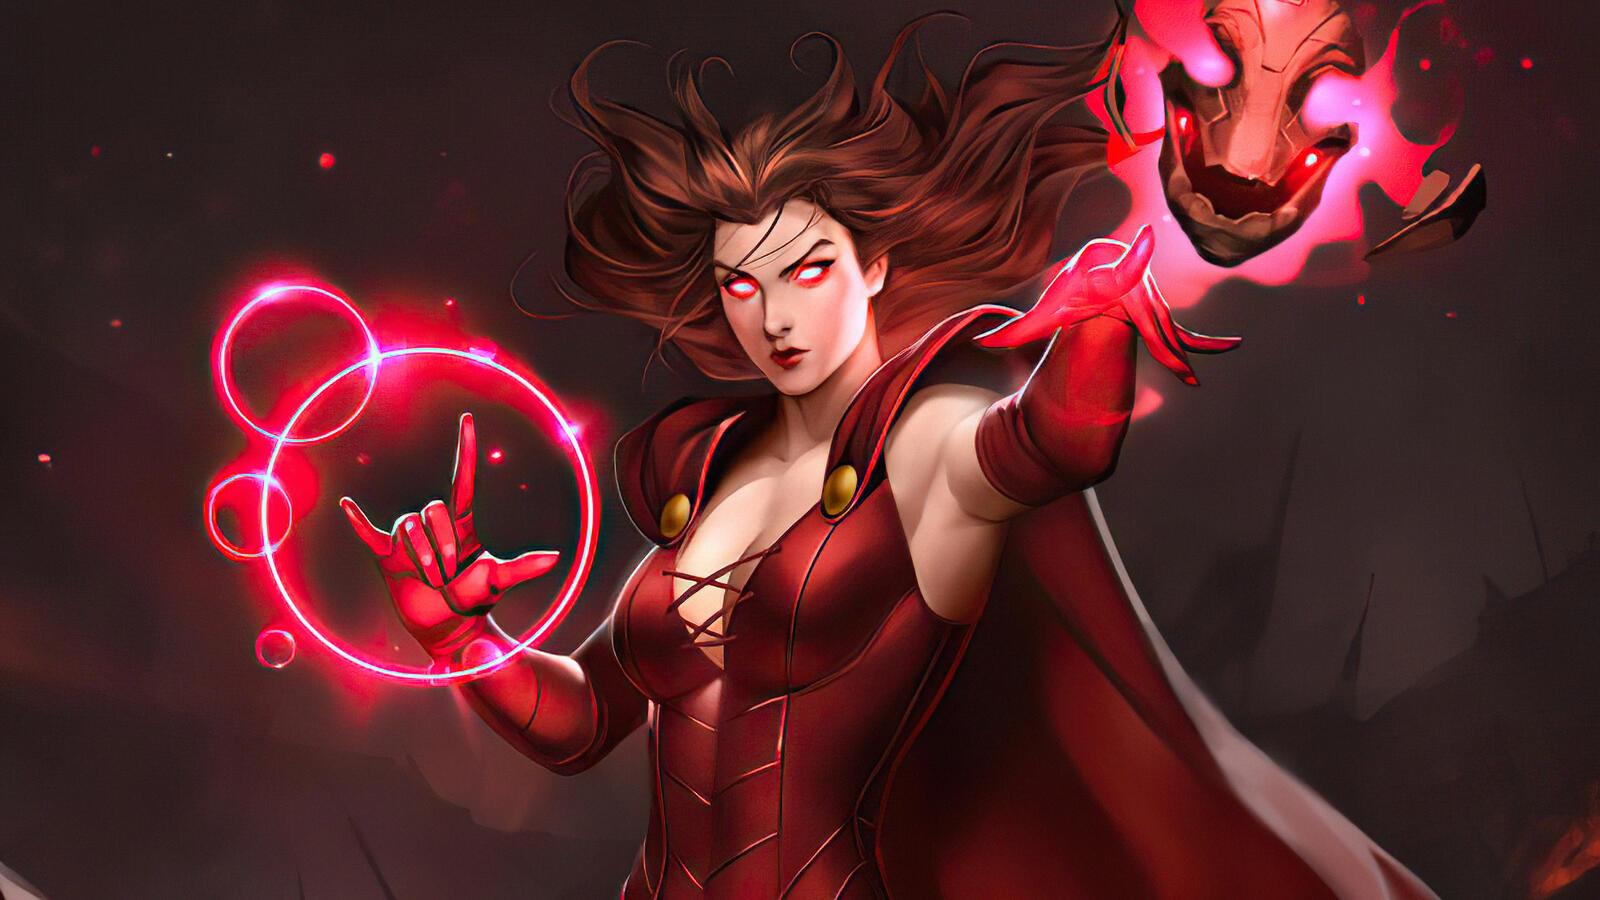 Wallpapers TV show Scarlet Witch movies on the desktop